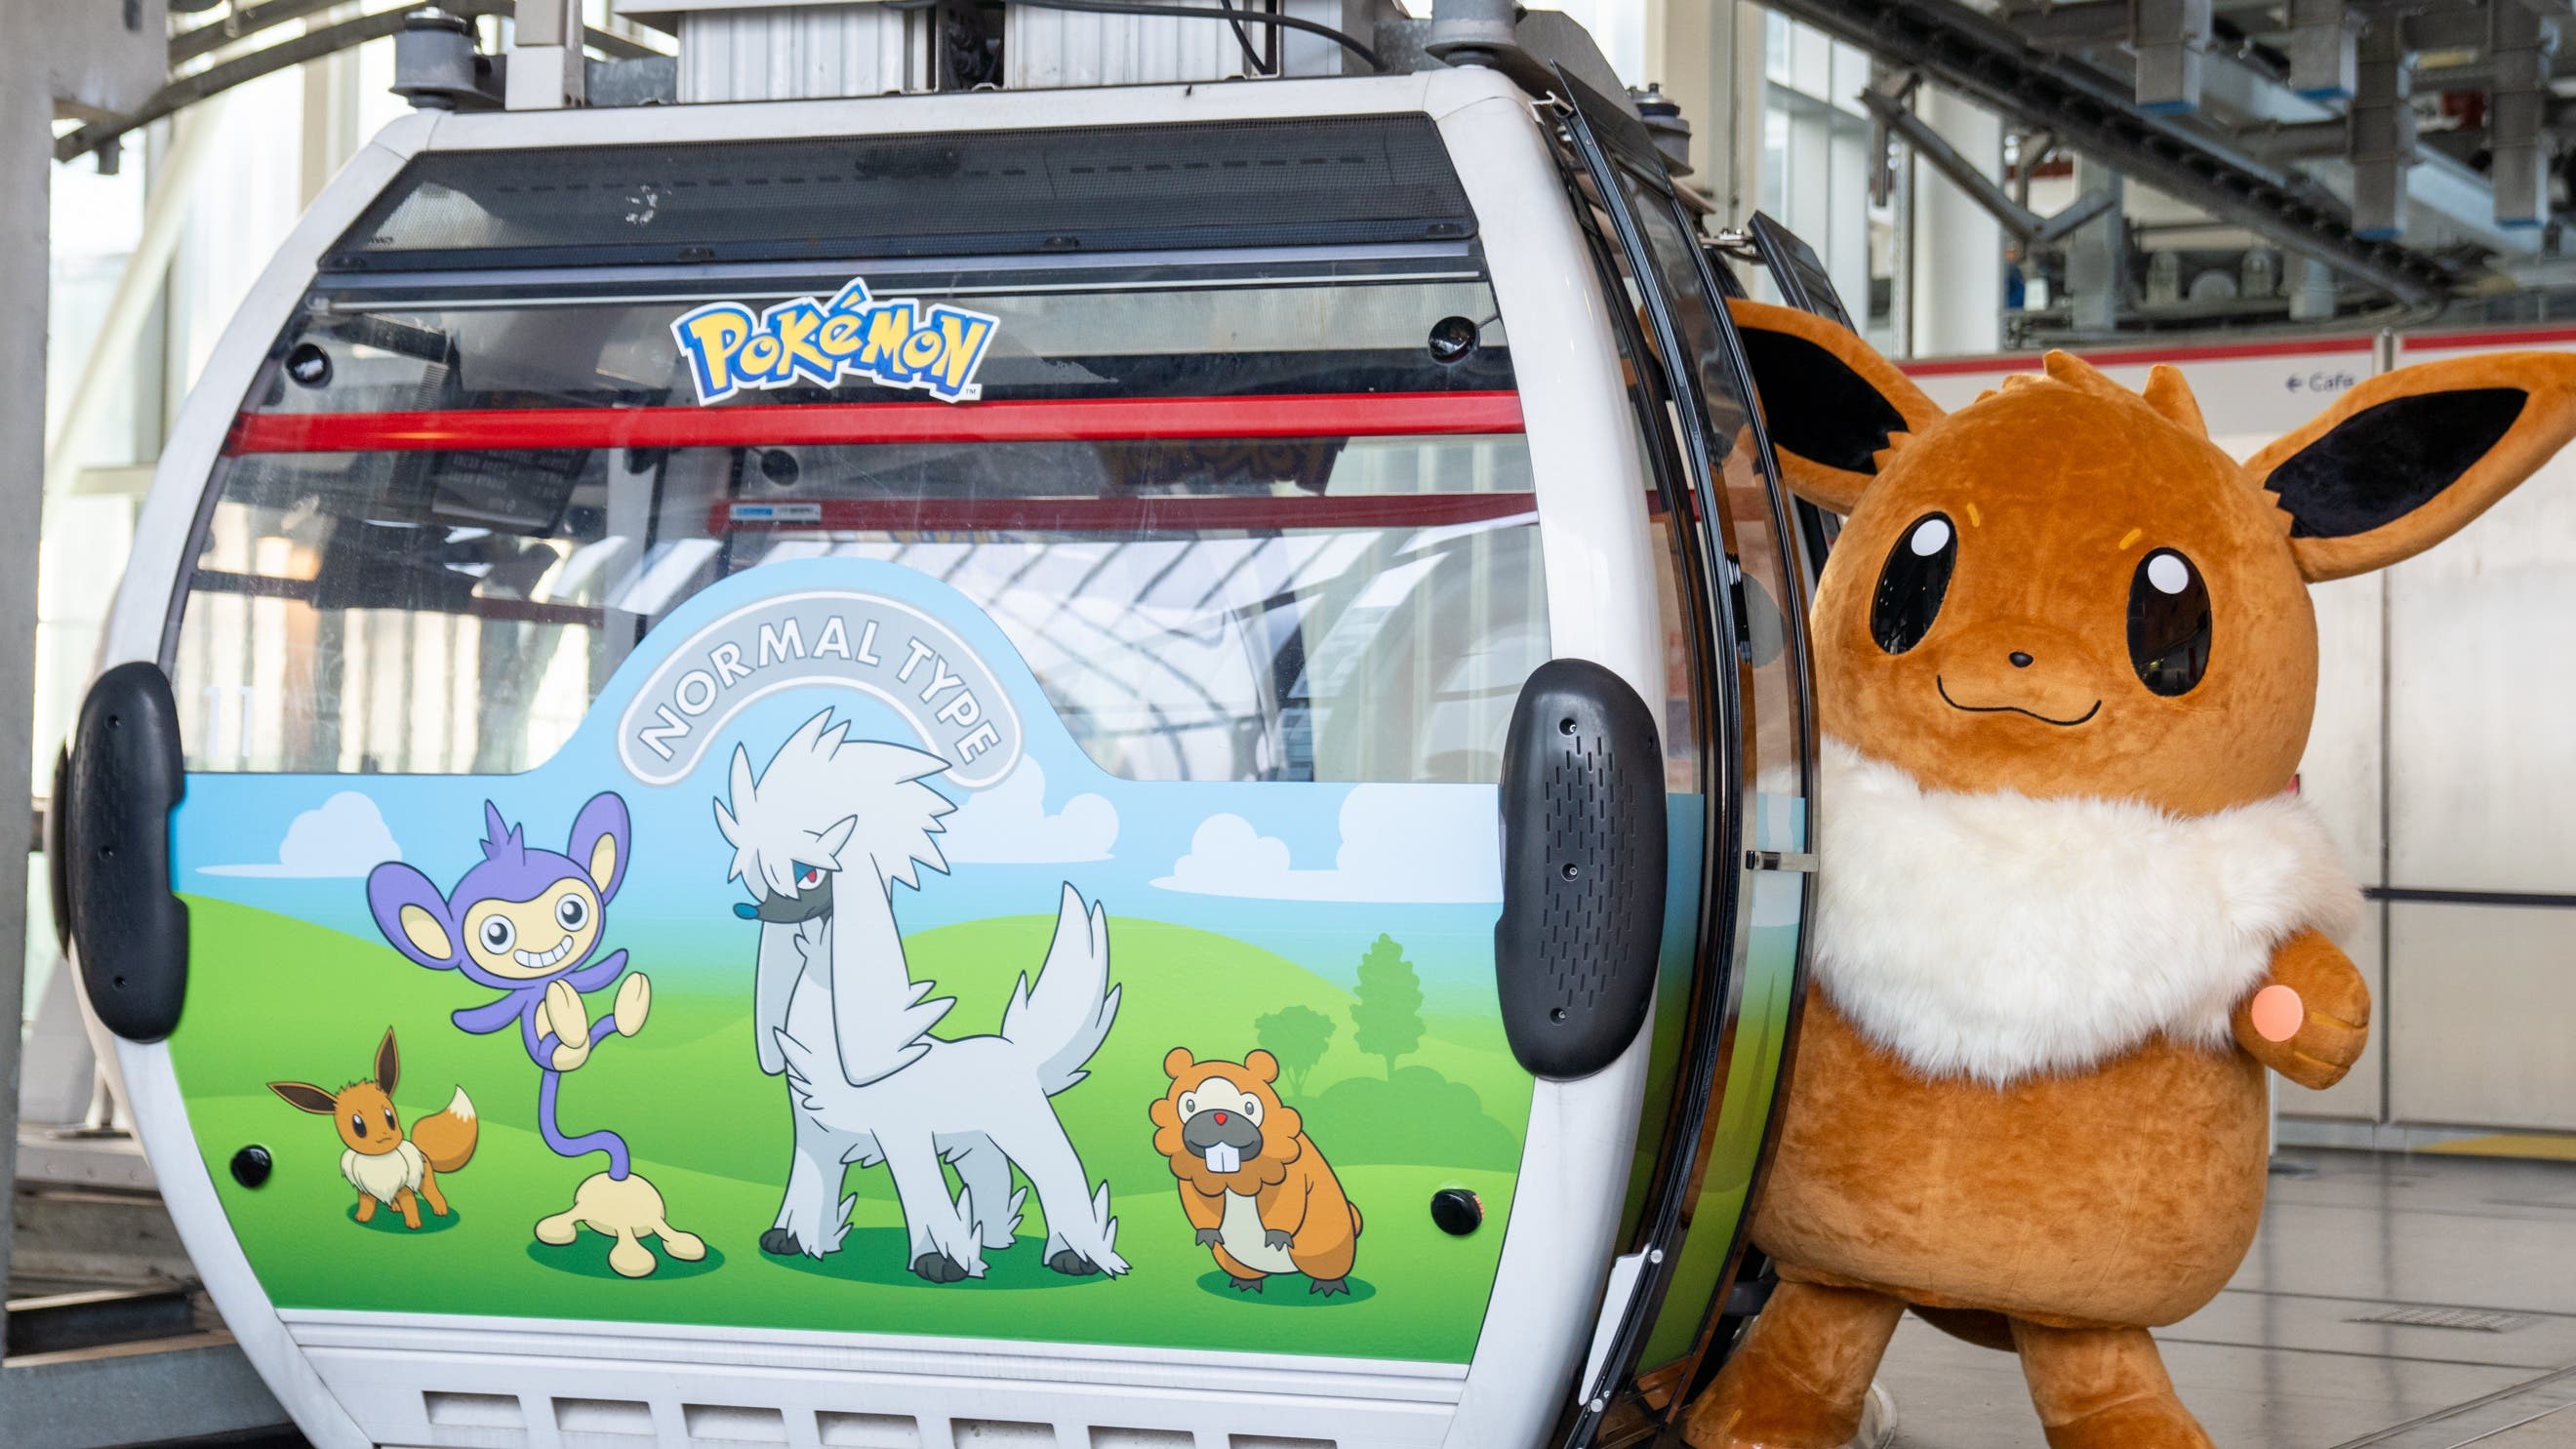 The 2022 Pokémon World Championships seem to be taking London by storm